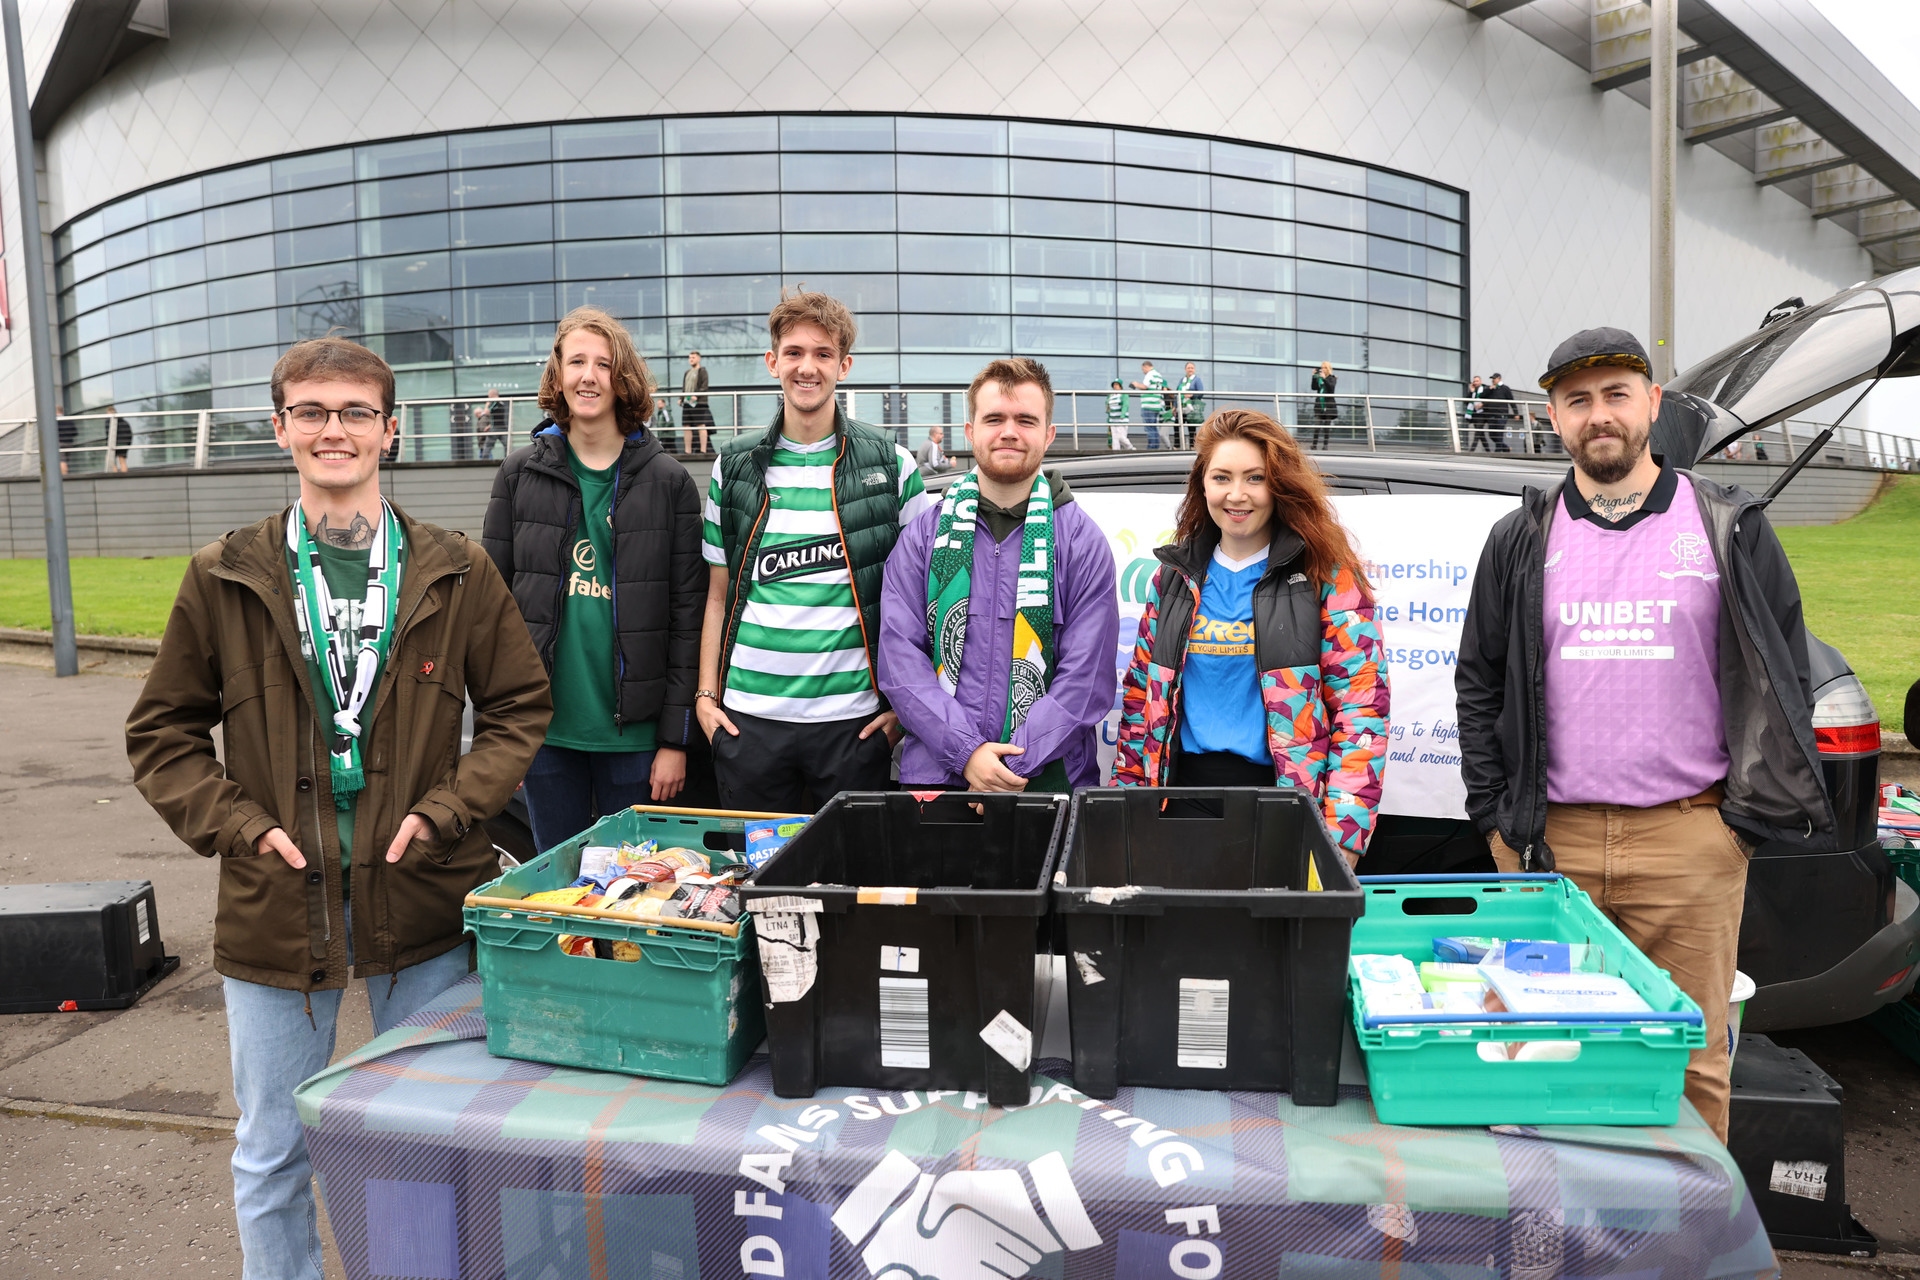 Rangers and Celtic volunteers run a food bank collection at Celtic Park.